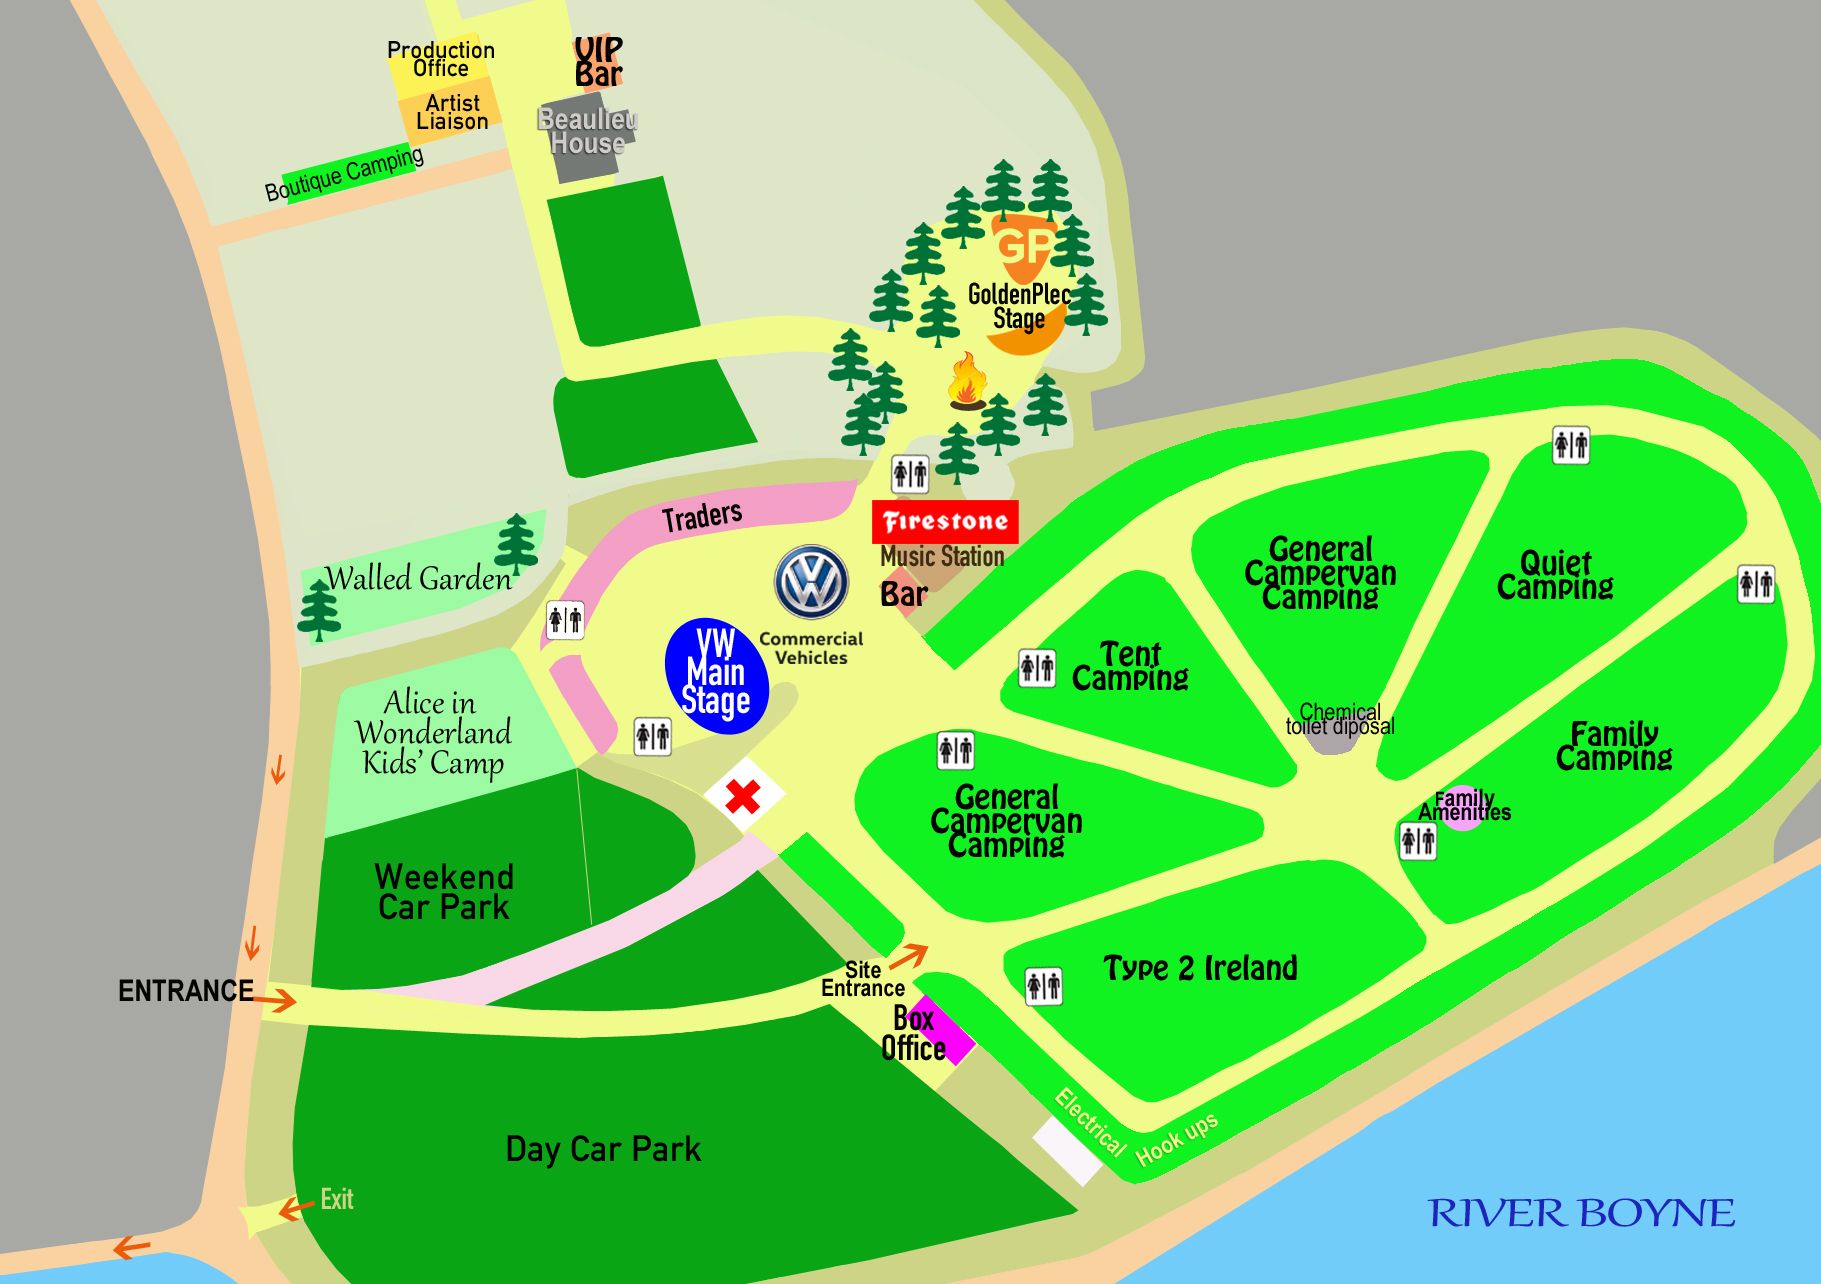 Vantastival 2016 Site Map for Guests